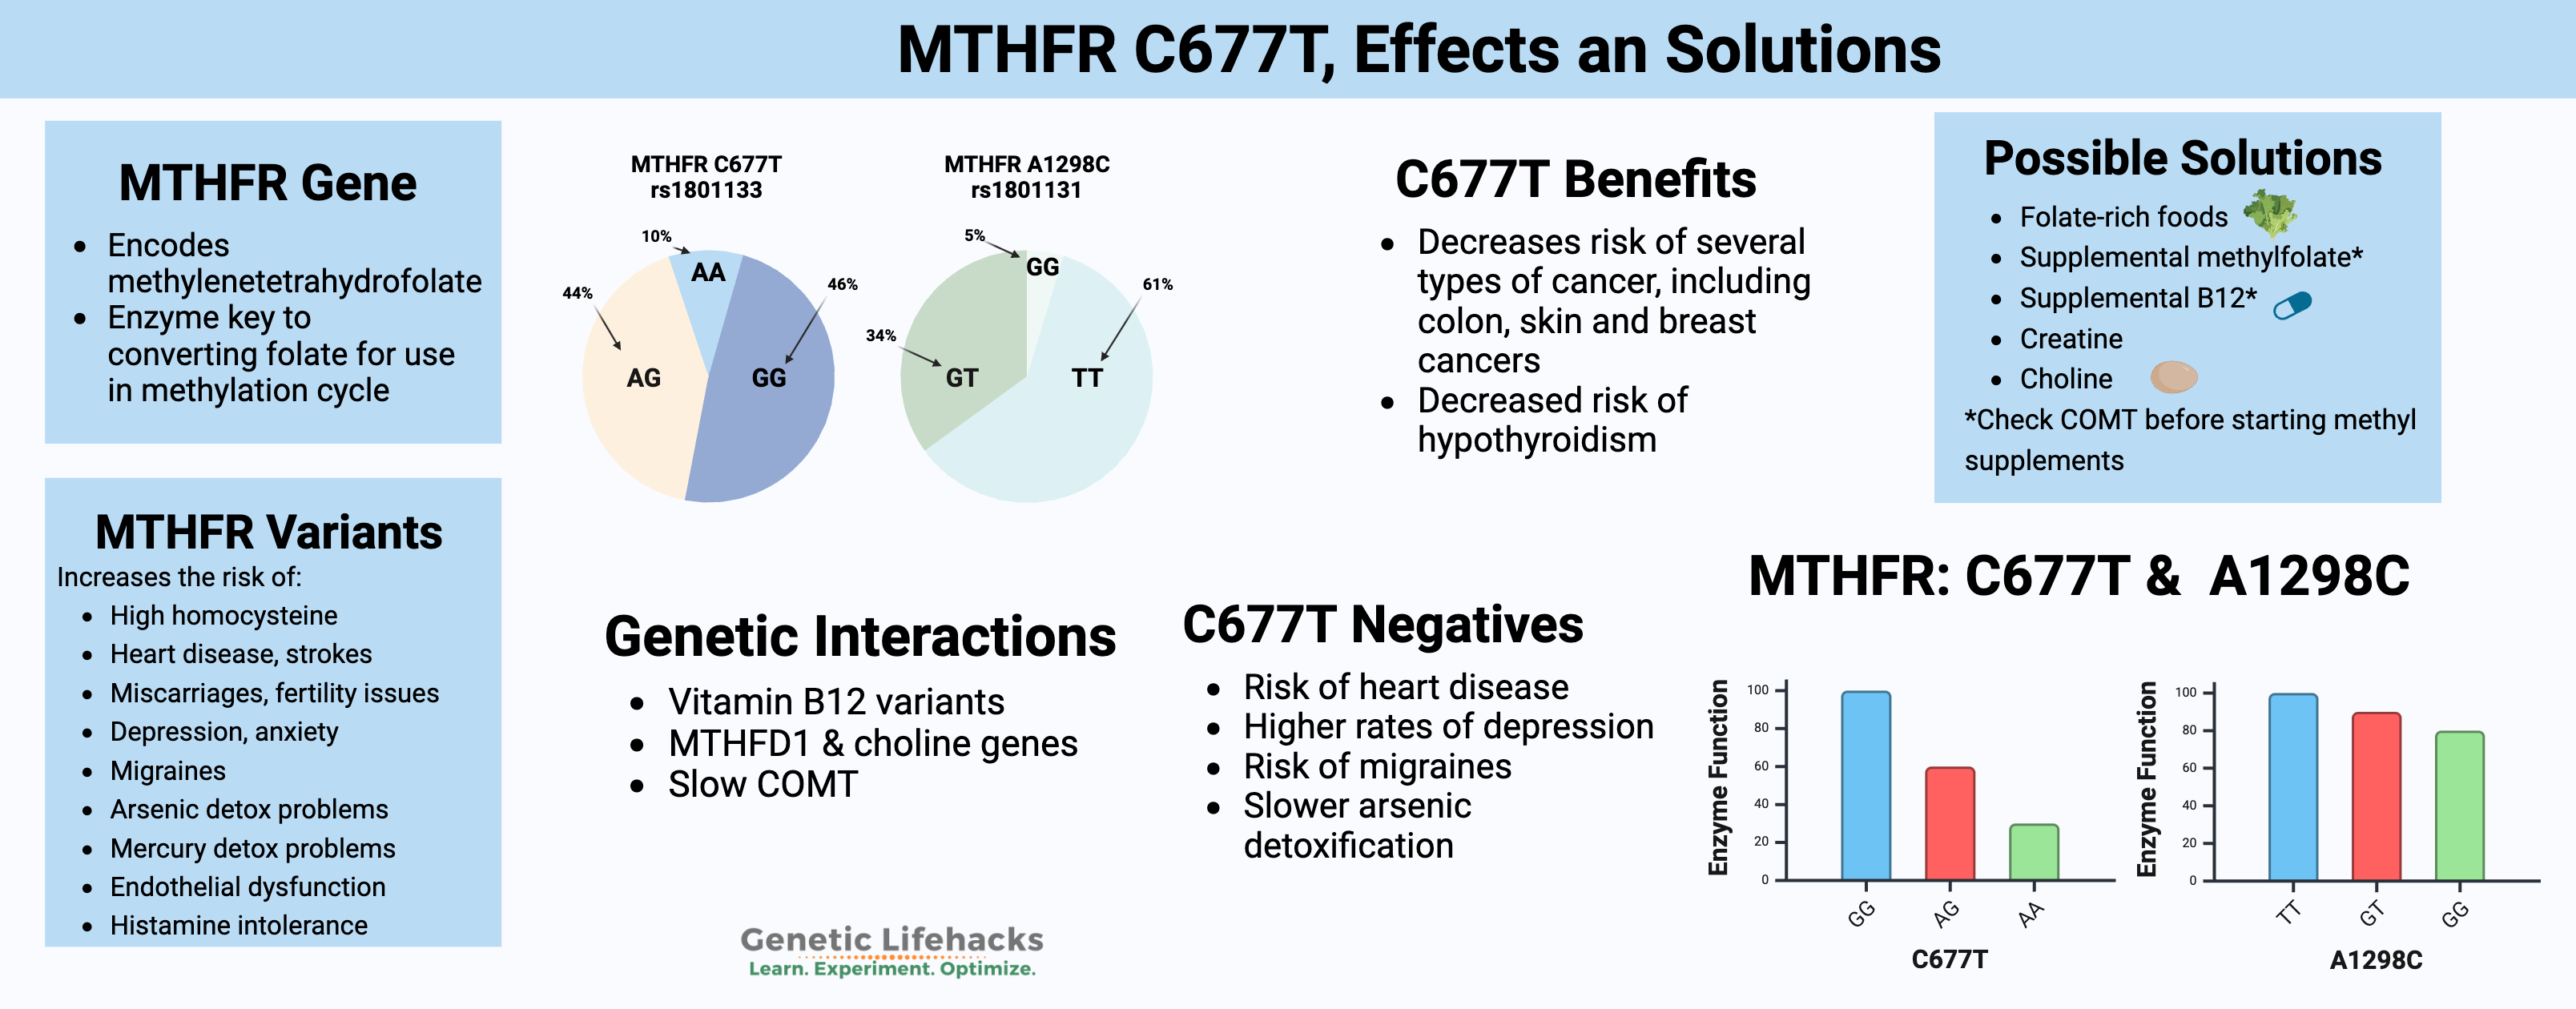 MTHFR c677t, symptoms and solutions